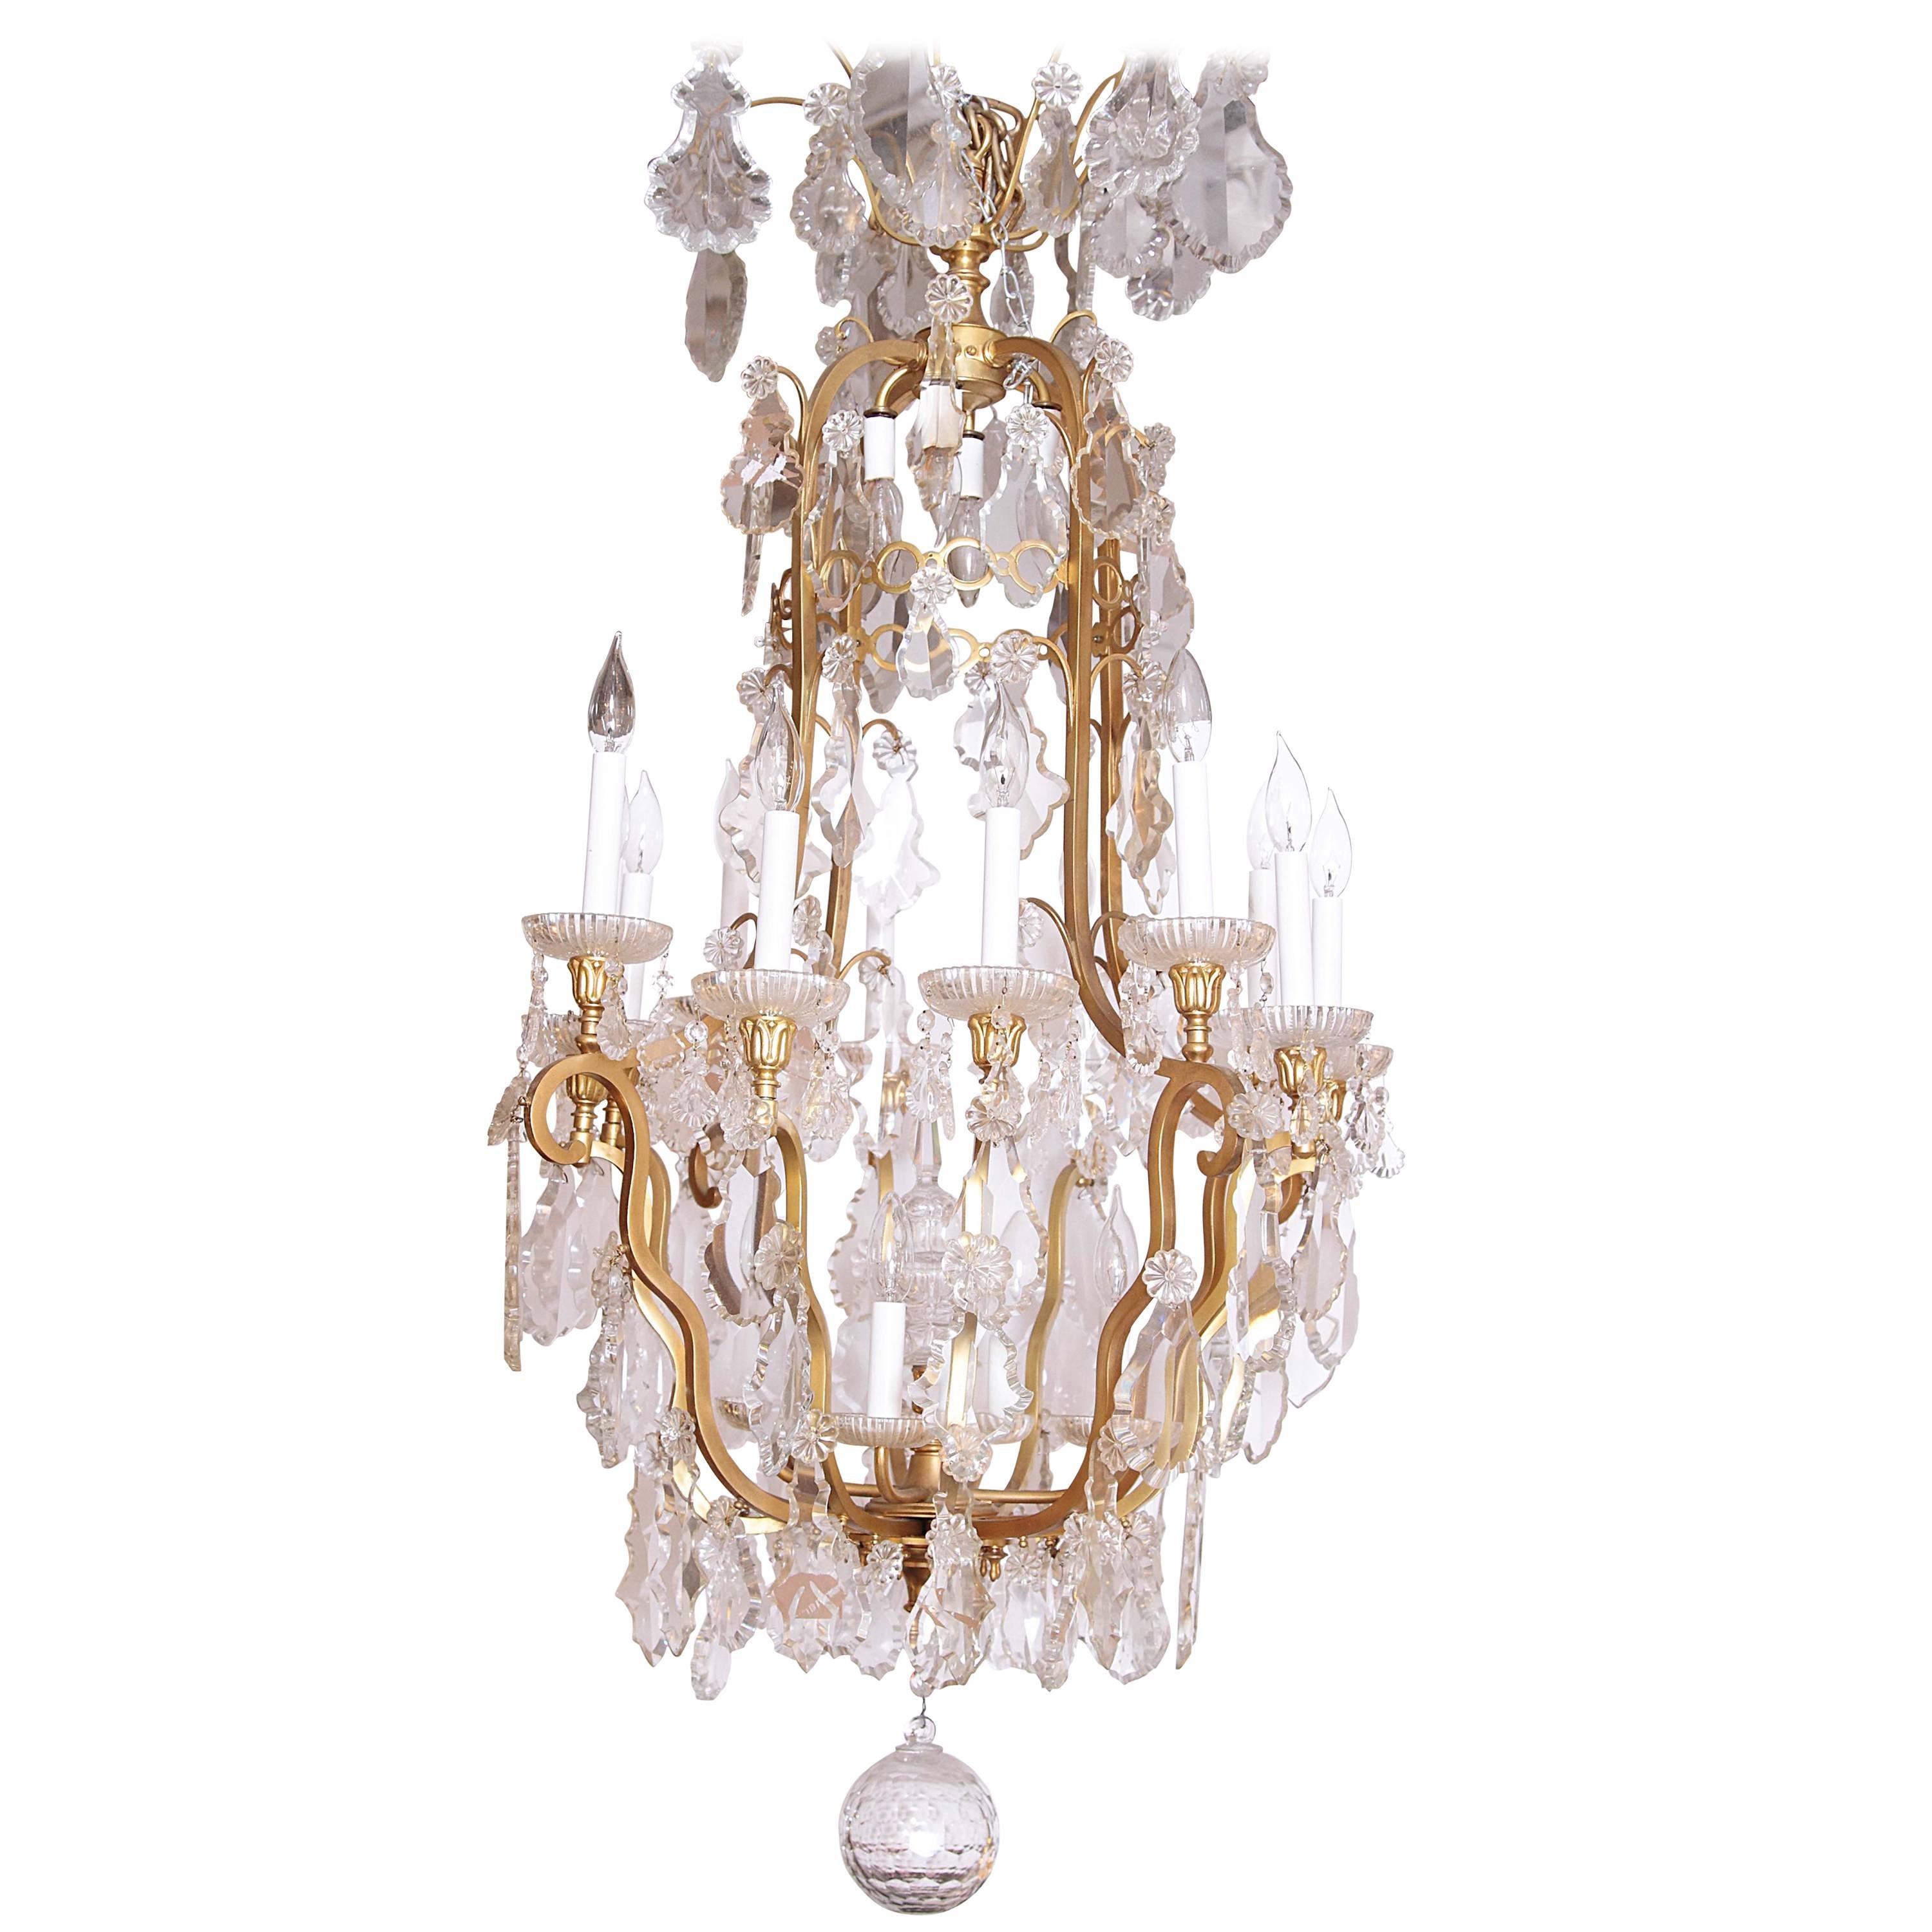 19th Century French Louis XVI Baccarat Cut Crystal Chandelier